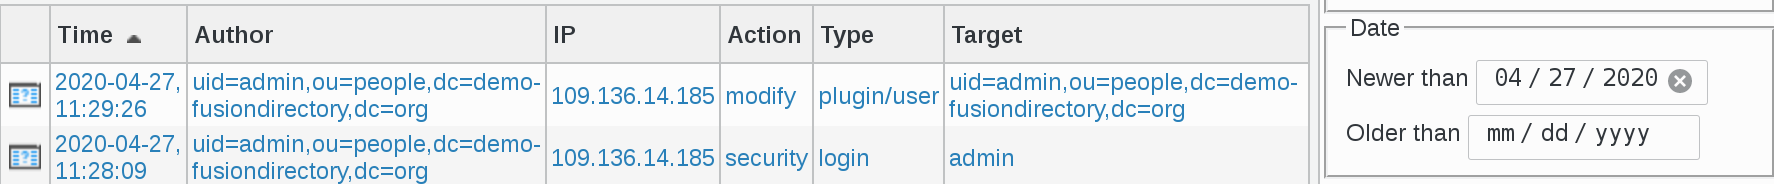 Picture of Audit filter result in FusionDirectory